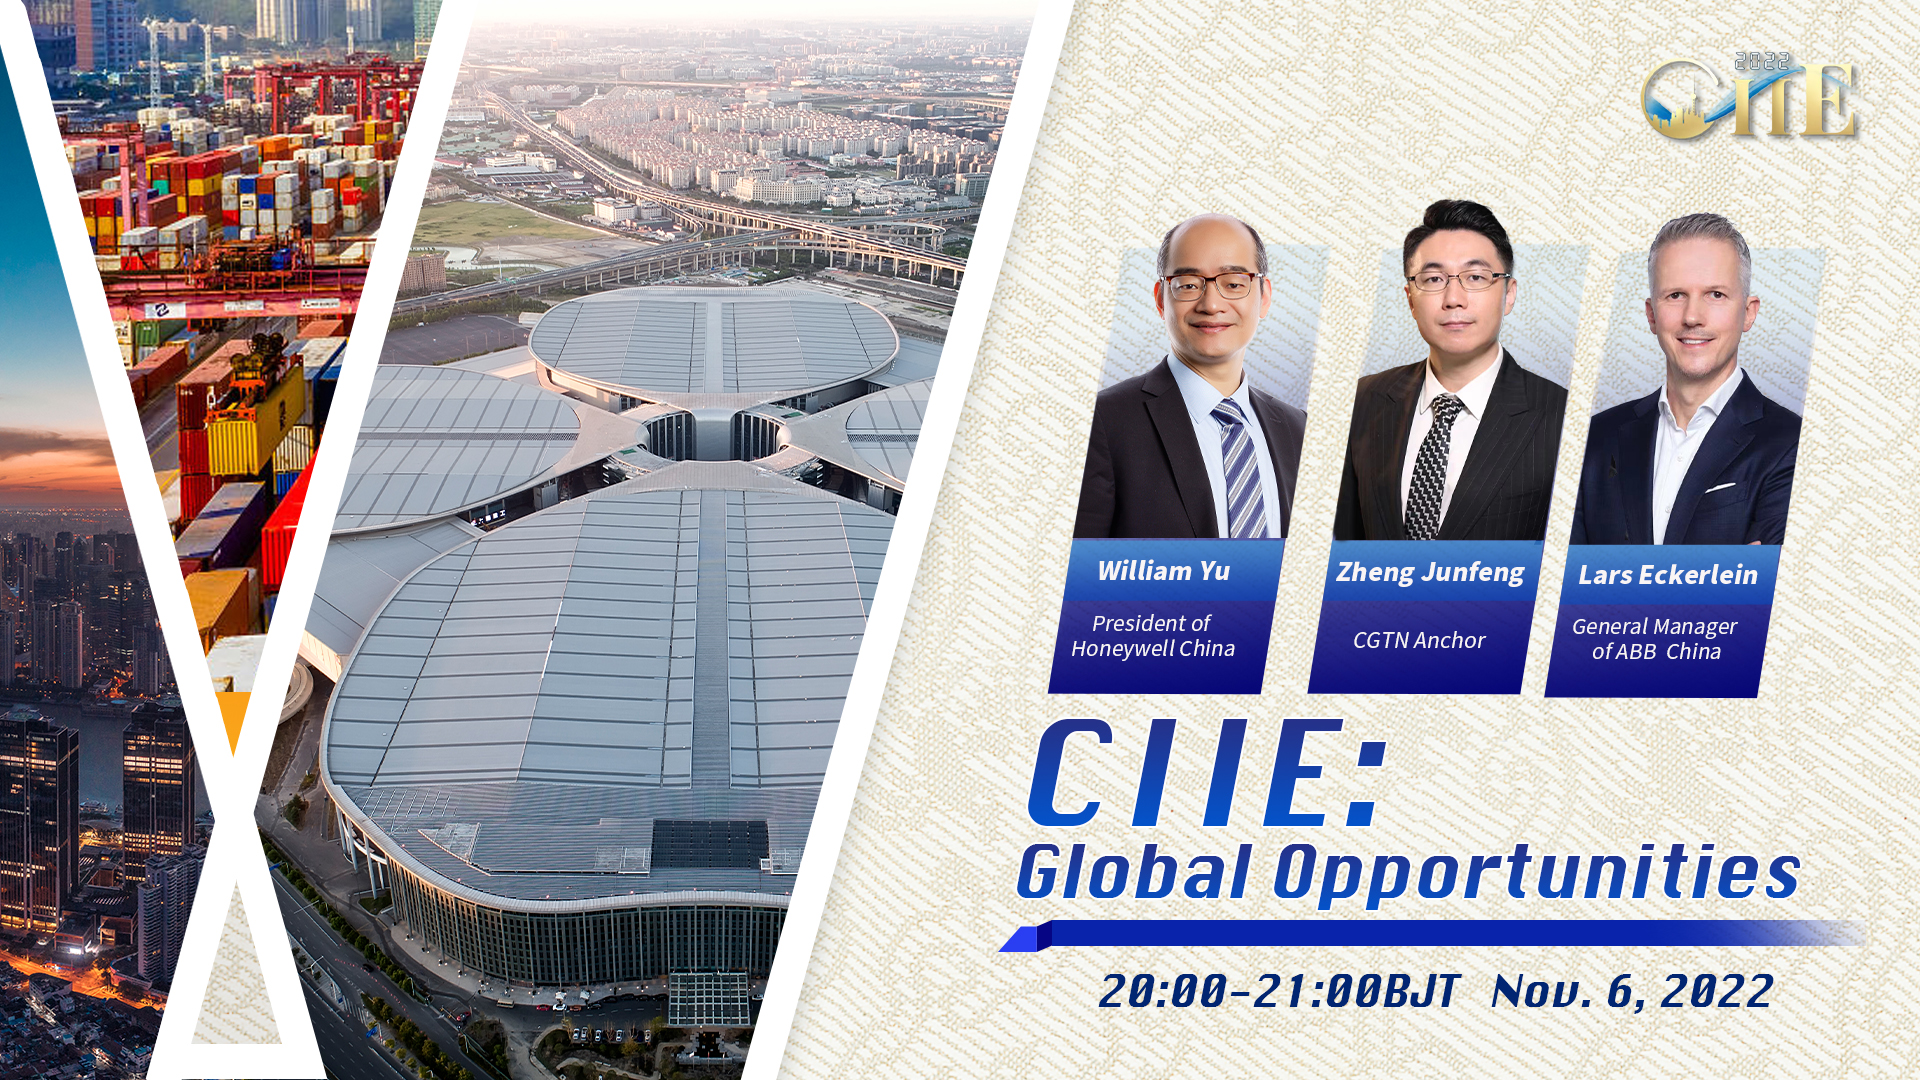 Live: Explore global opportunities at the 5th CIIE